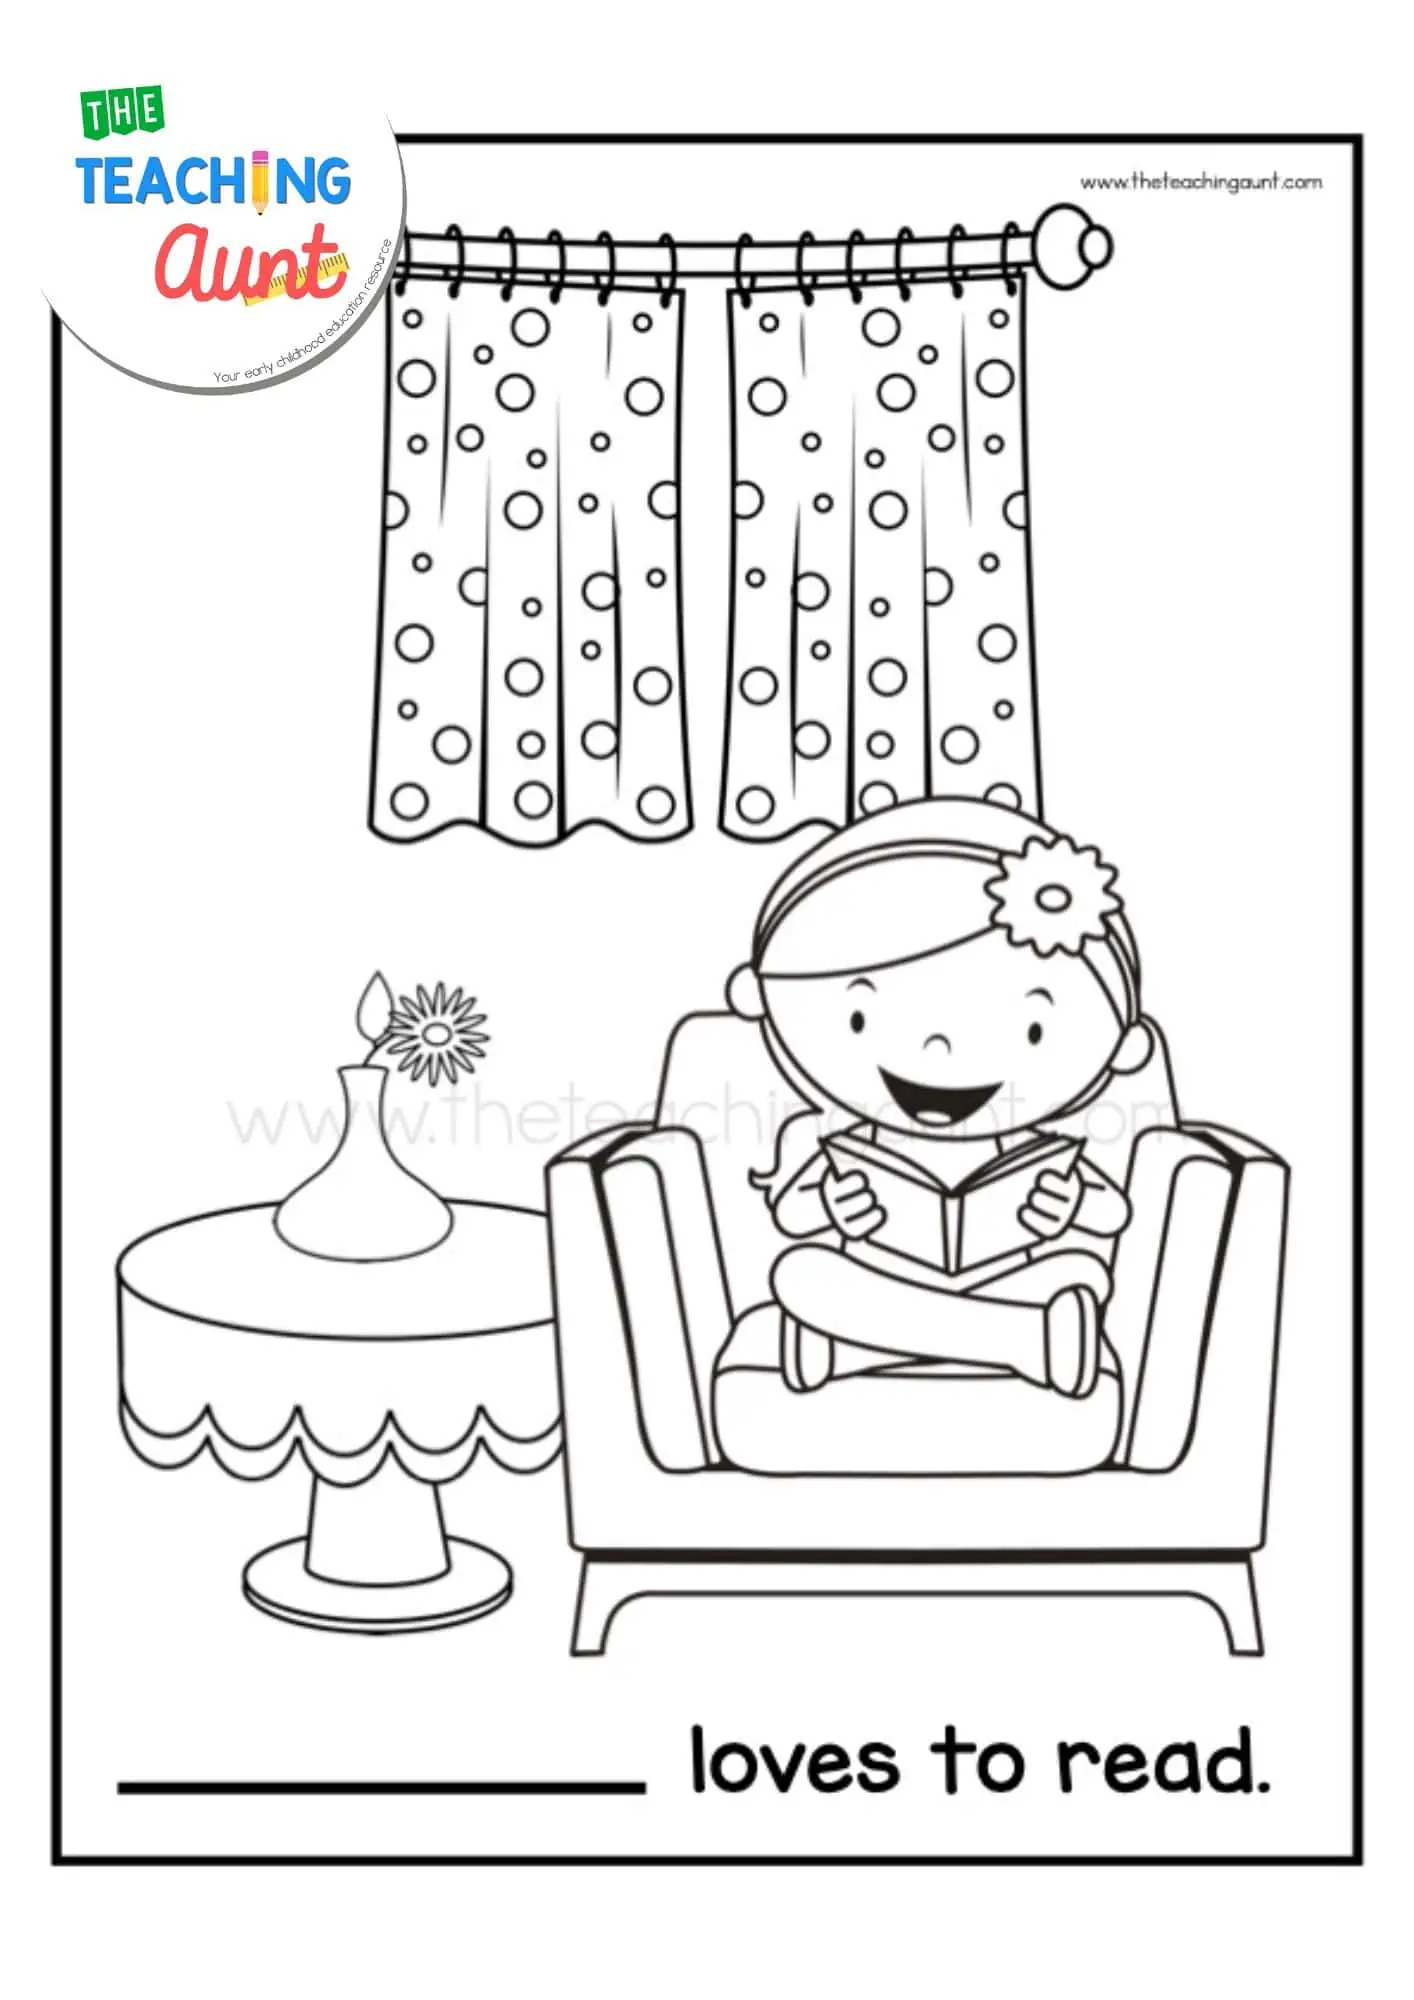 Simple coloring pages for kids